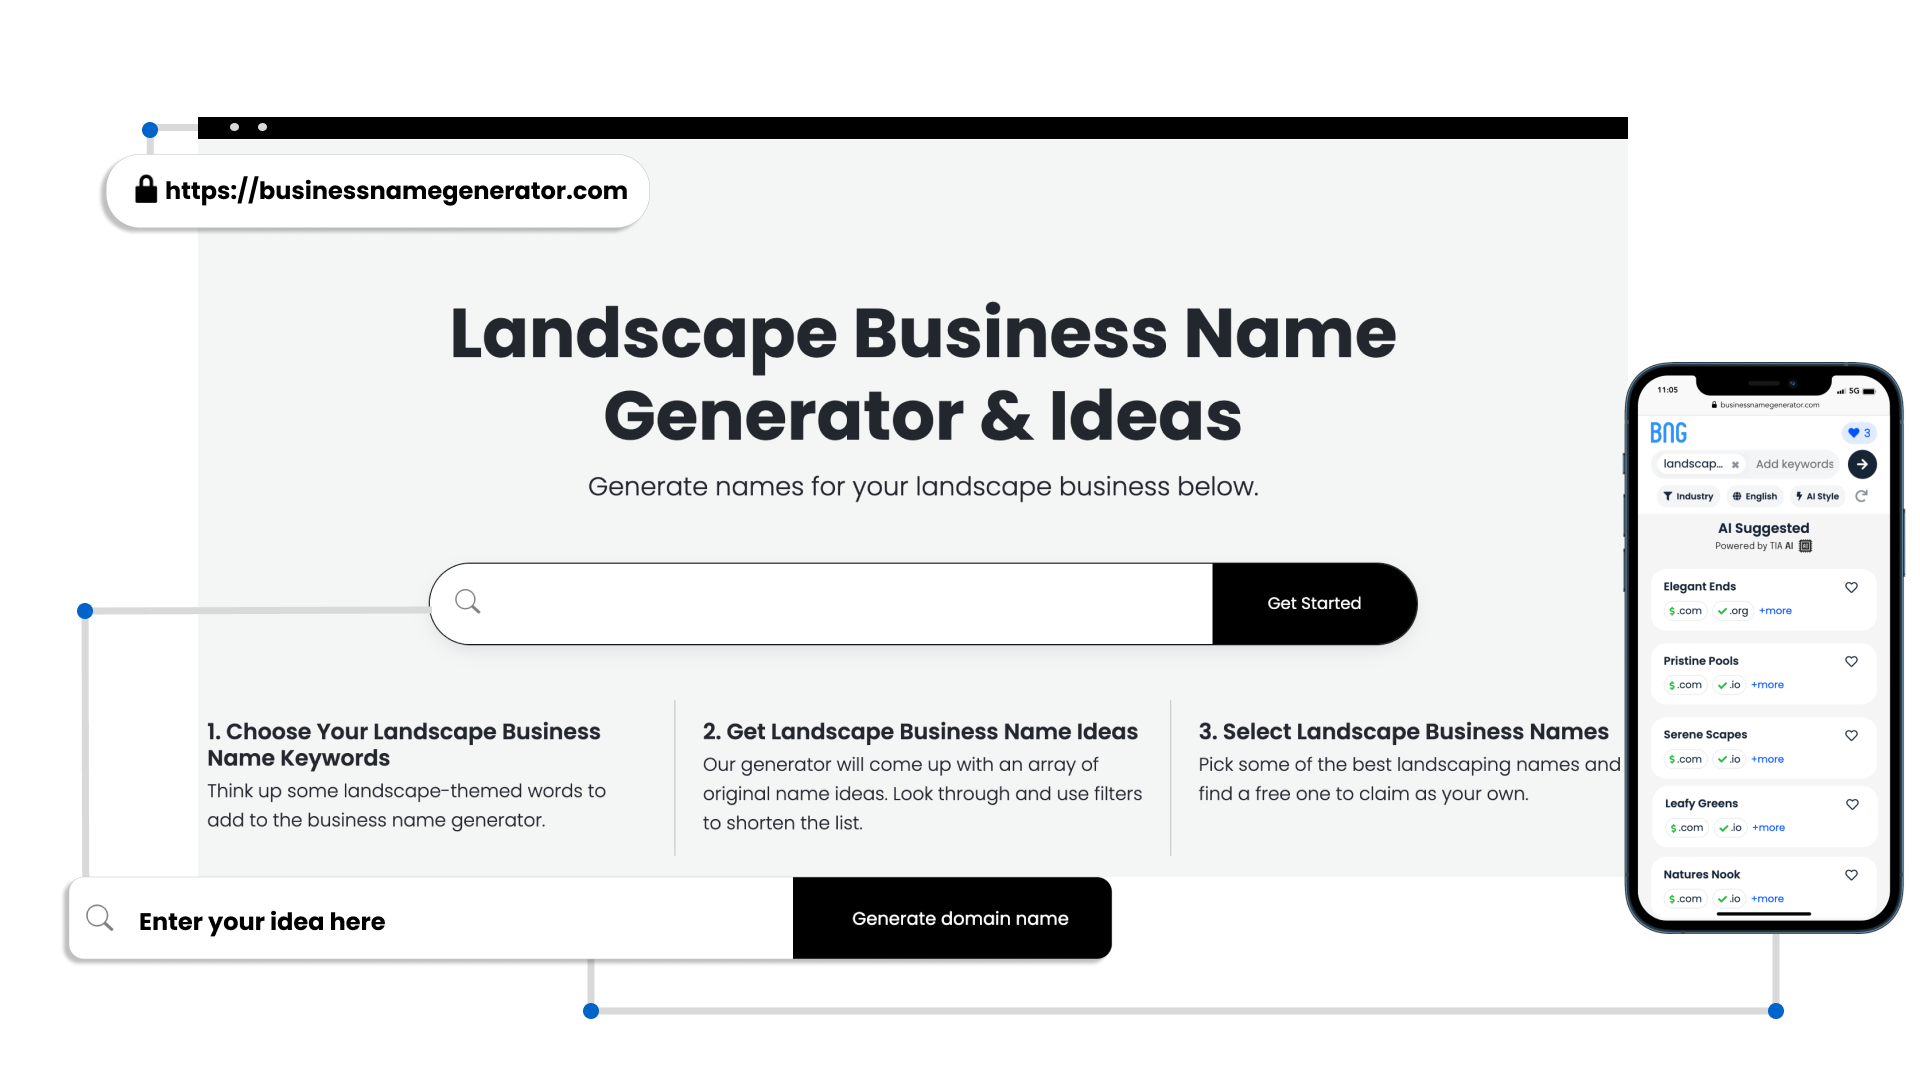 Benefits of Our Landscape Business Name Generator
